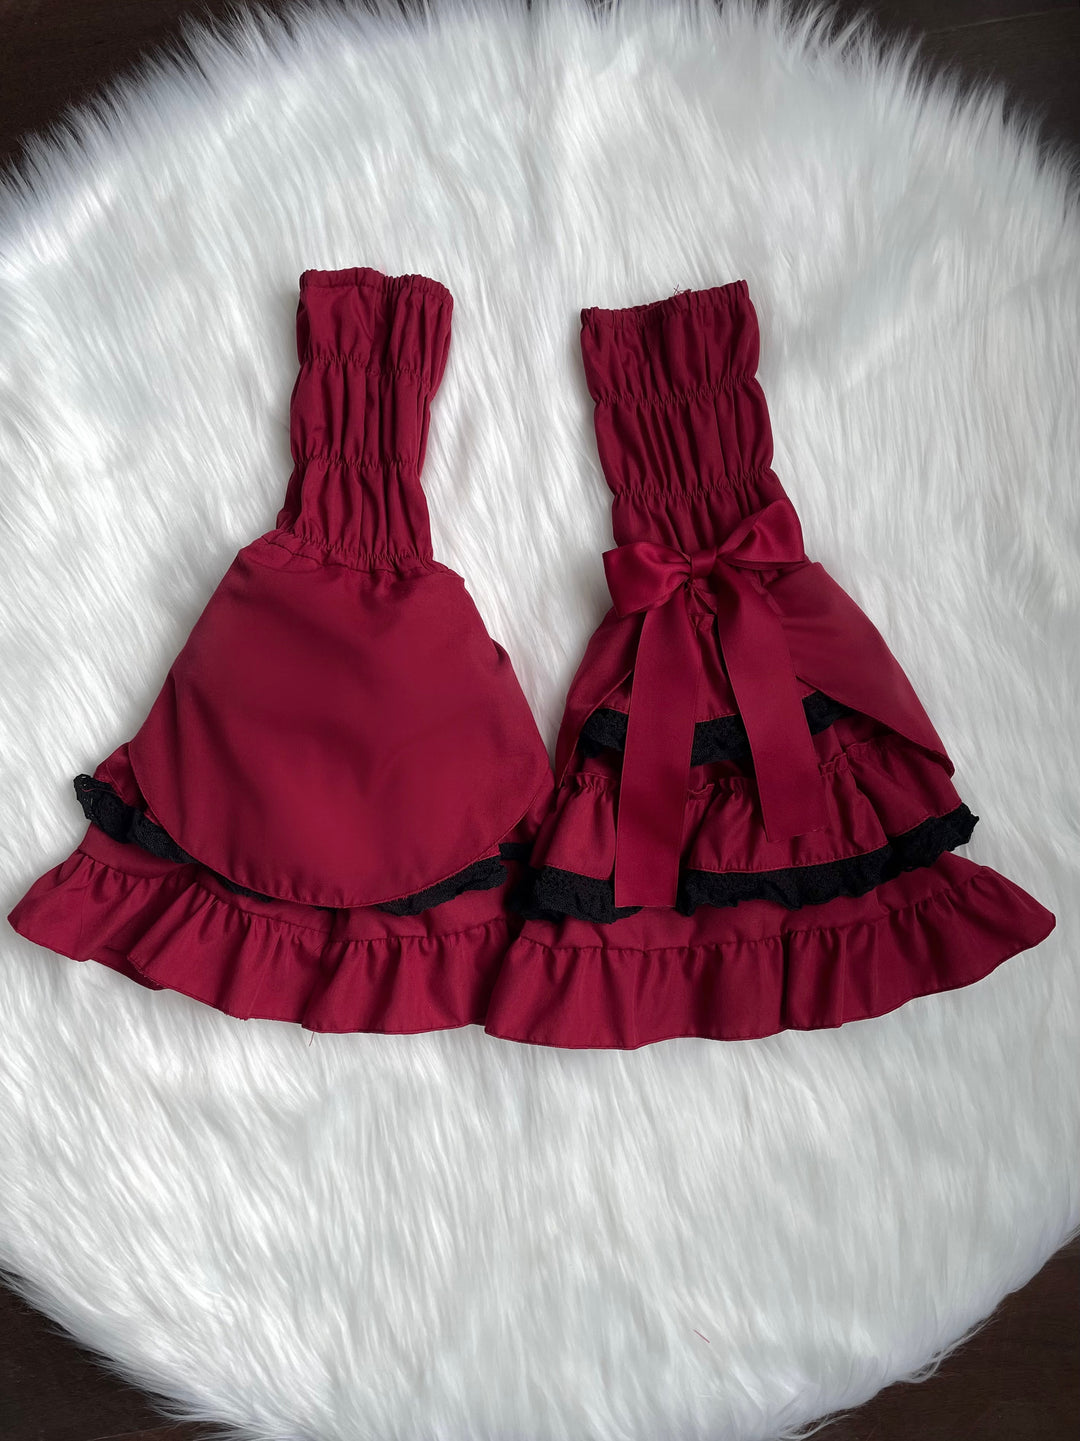 Mengfuzi~Doll Heart~Gorgeous Lolita Dress Vintage OP Cape Set S Red and black sleeves 